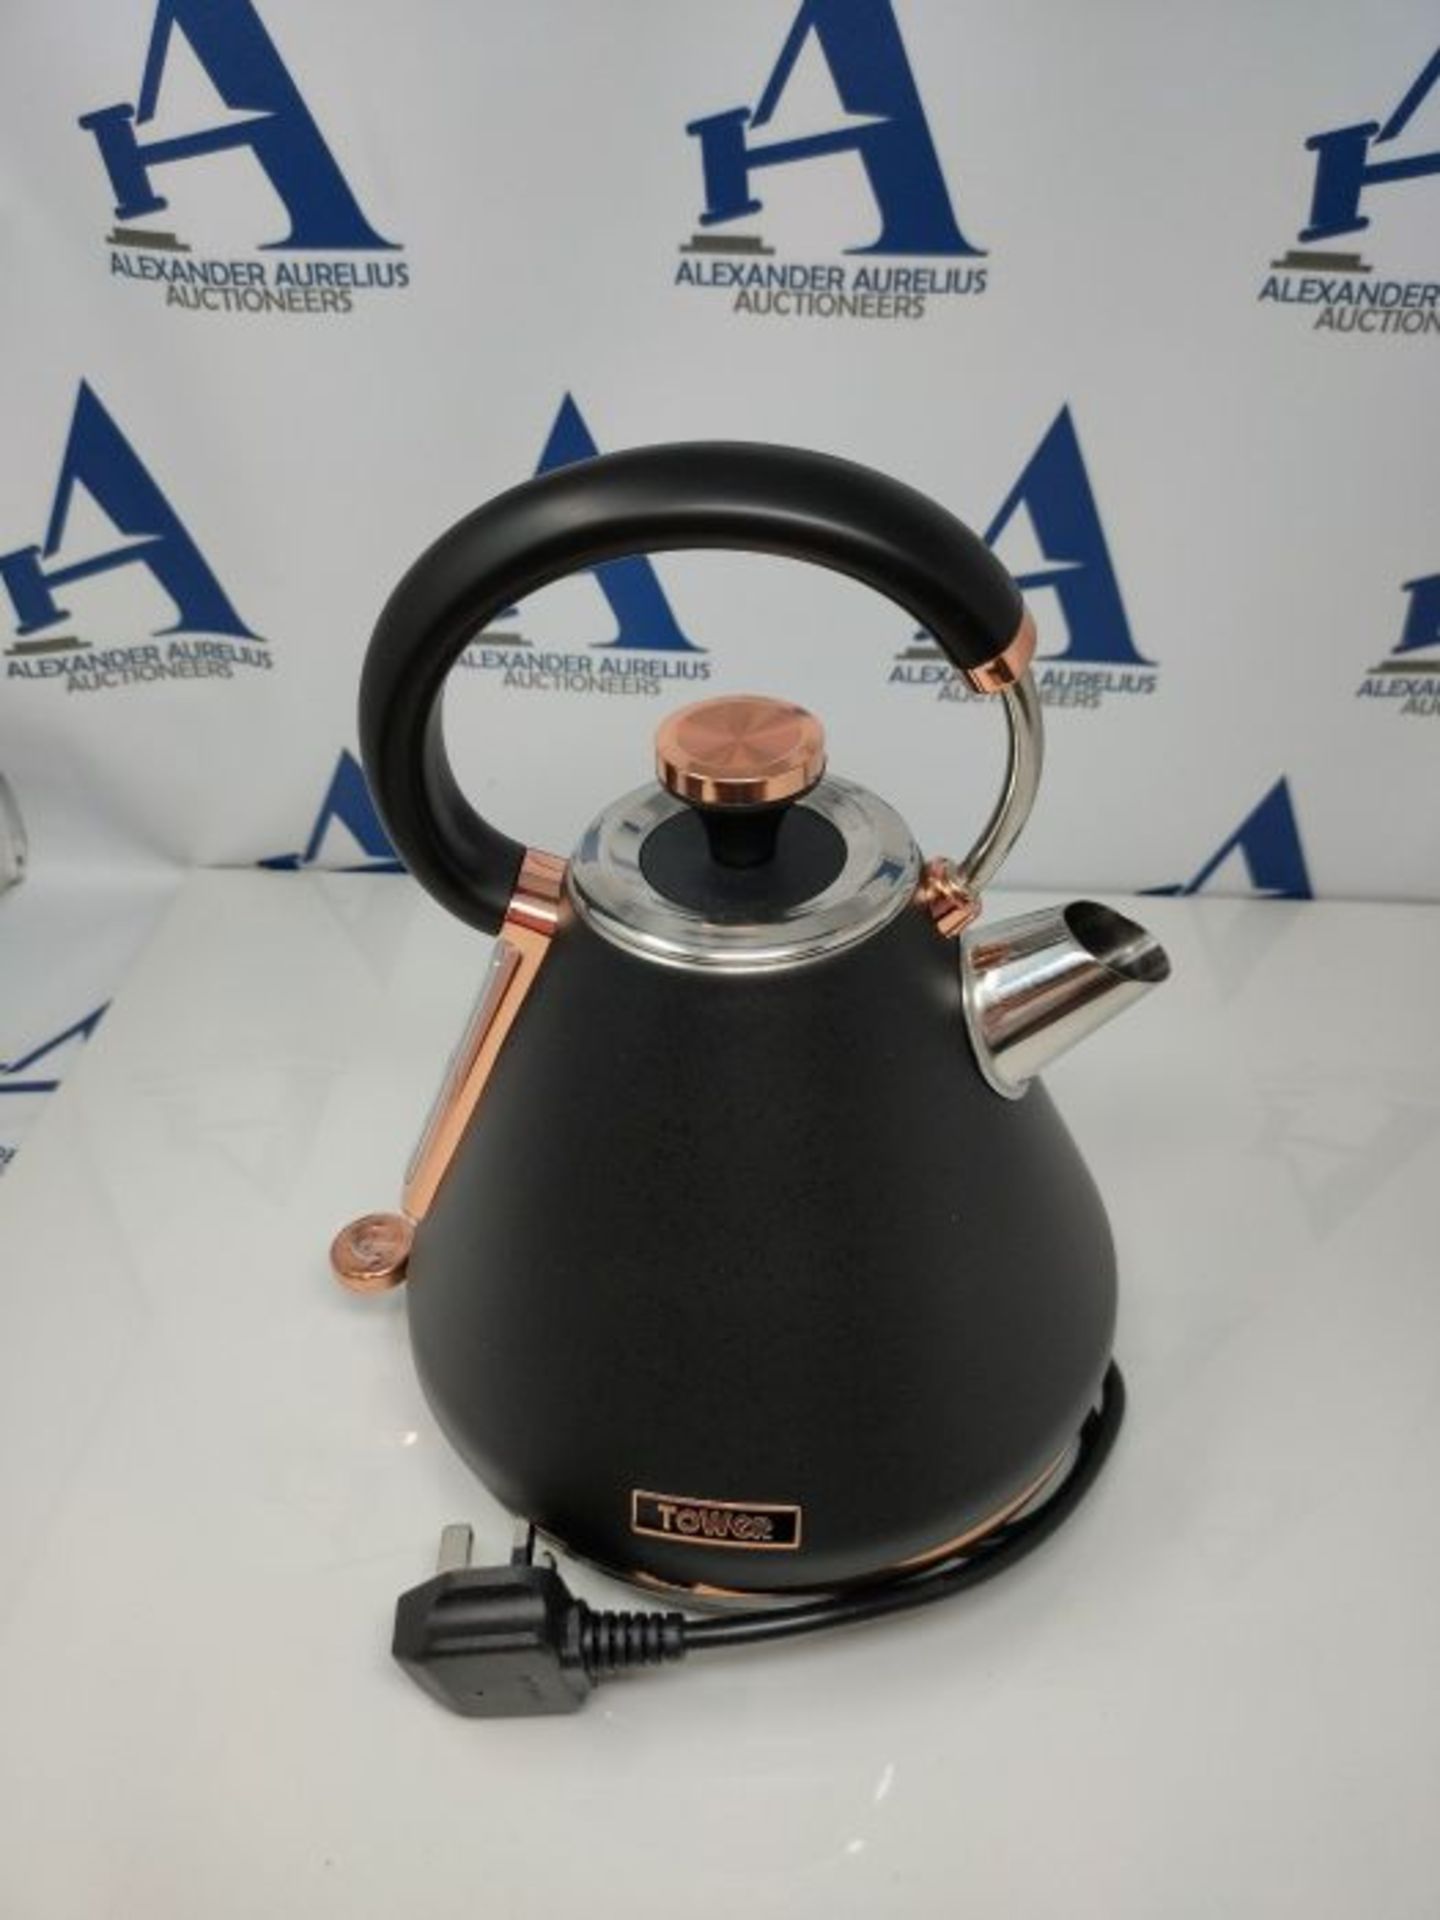 Tower T10044RG Cavaletto Pyramid Kettle with Fast Boil, Detachable Filter, 1.7 Litre, - Image 3 of 3